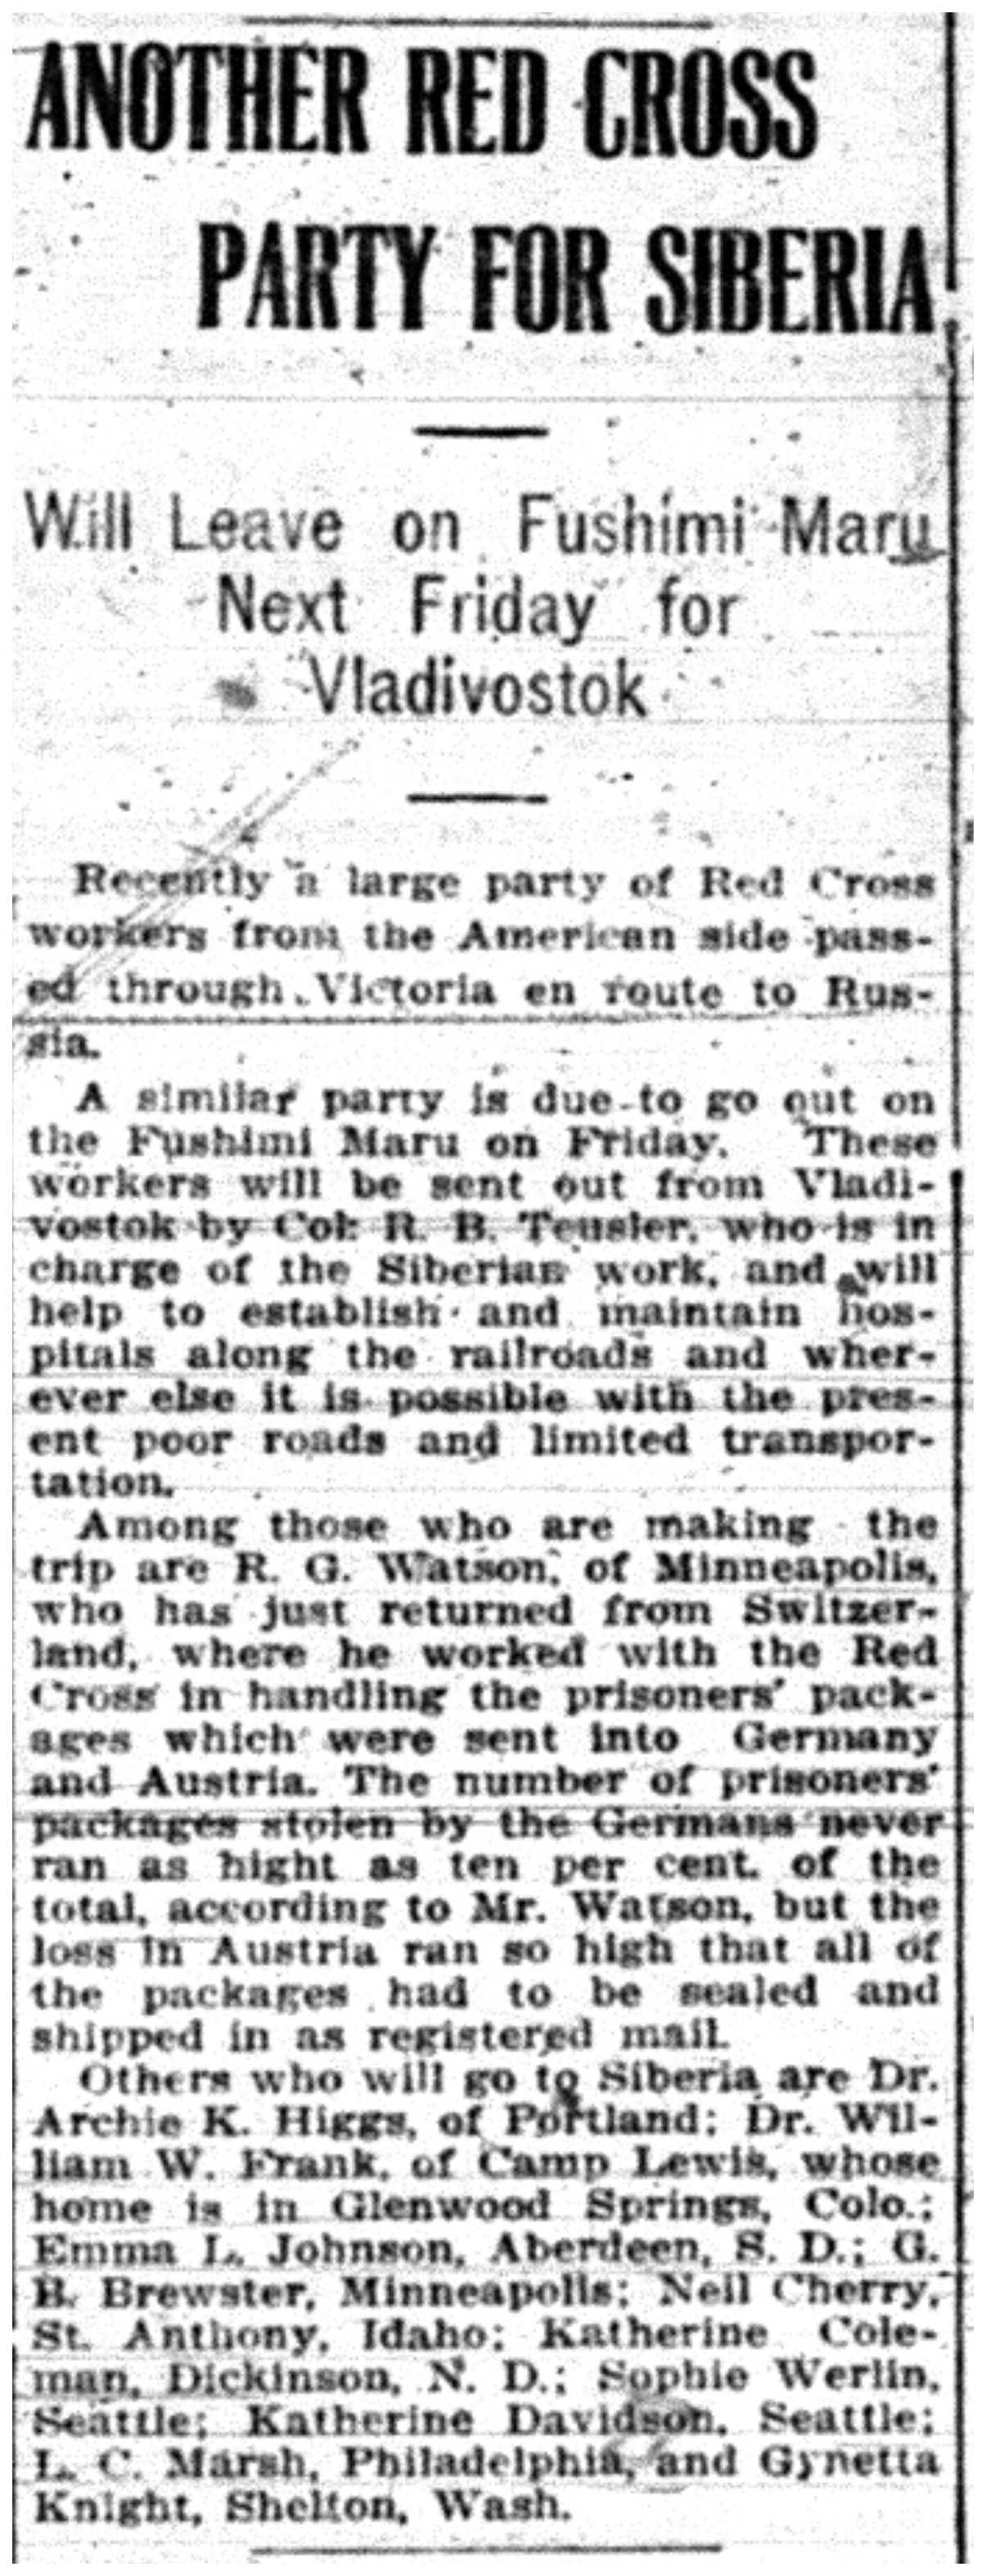 "Another Red Cross Party for Siberia"